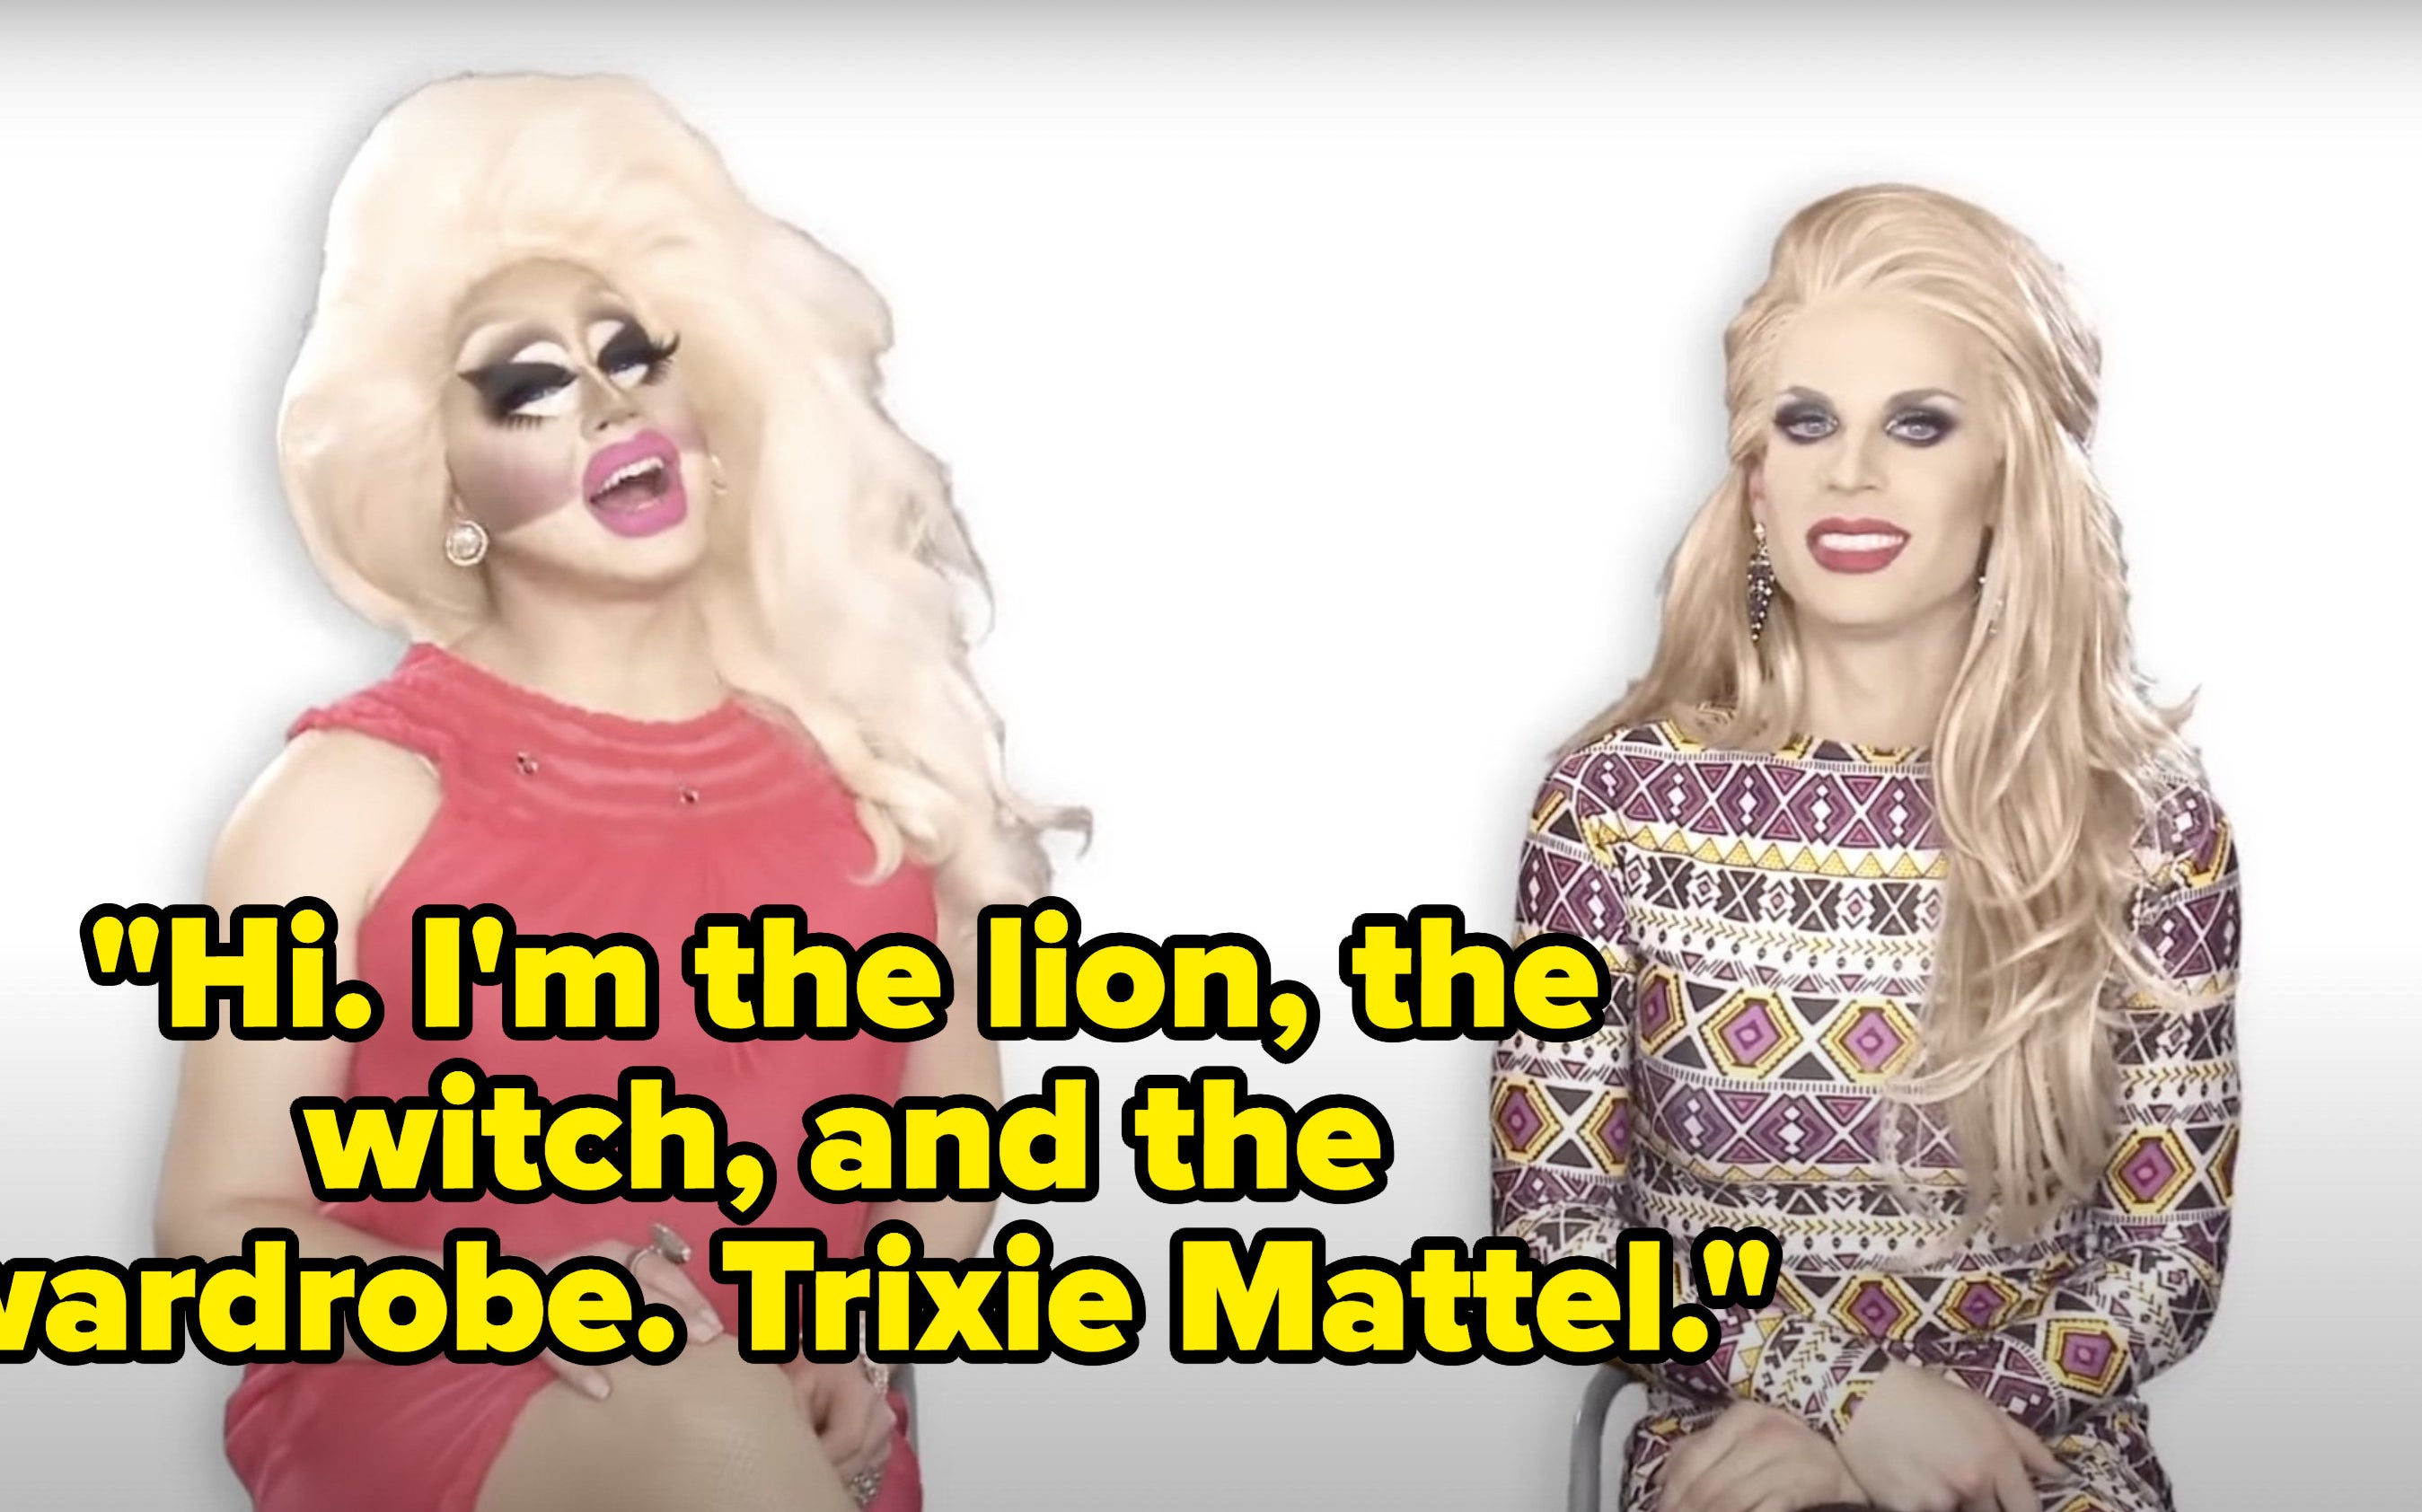 Trixie says, Hi, Im the lion, the witch, and the wardrobe.,Trixie Mattel